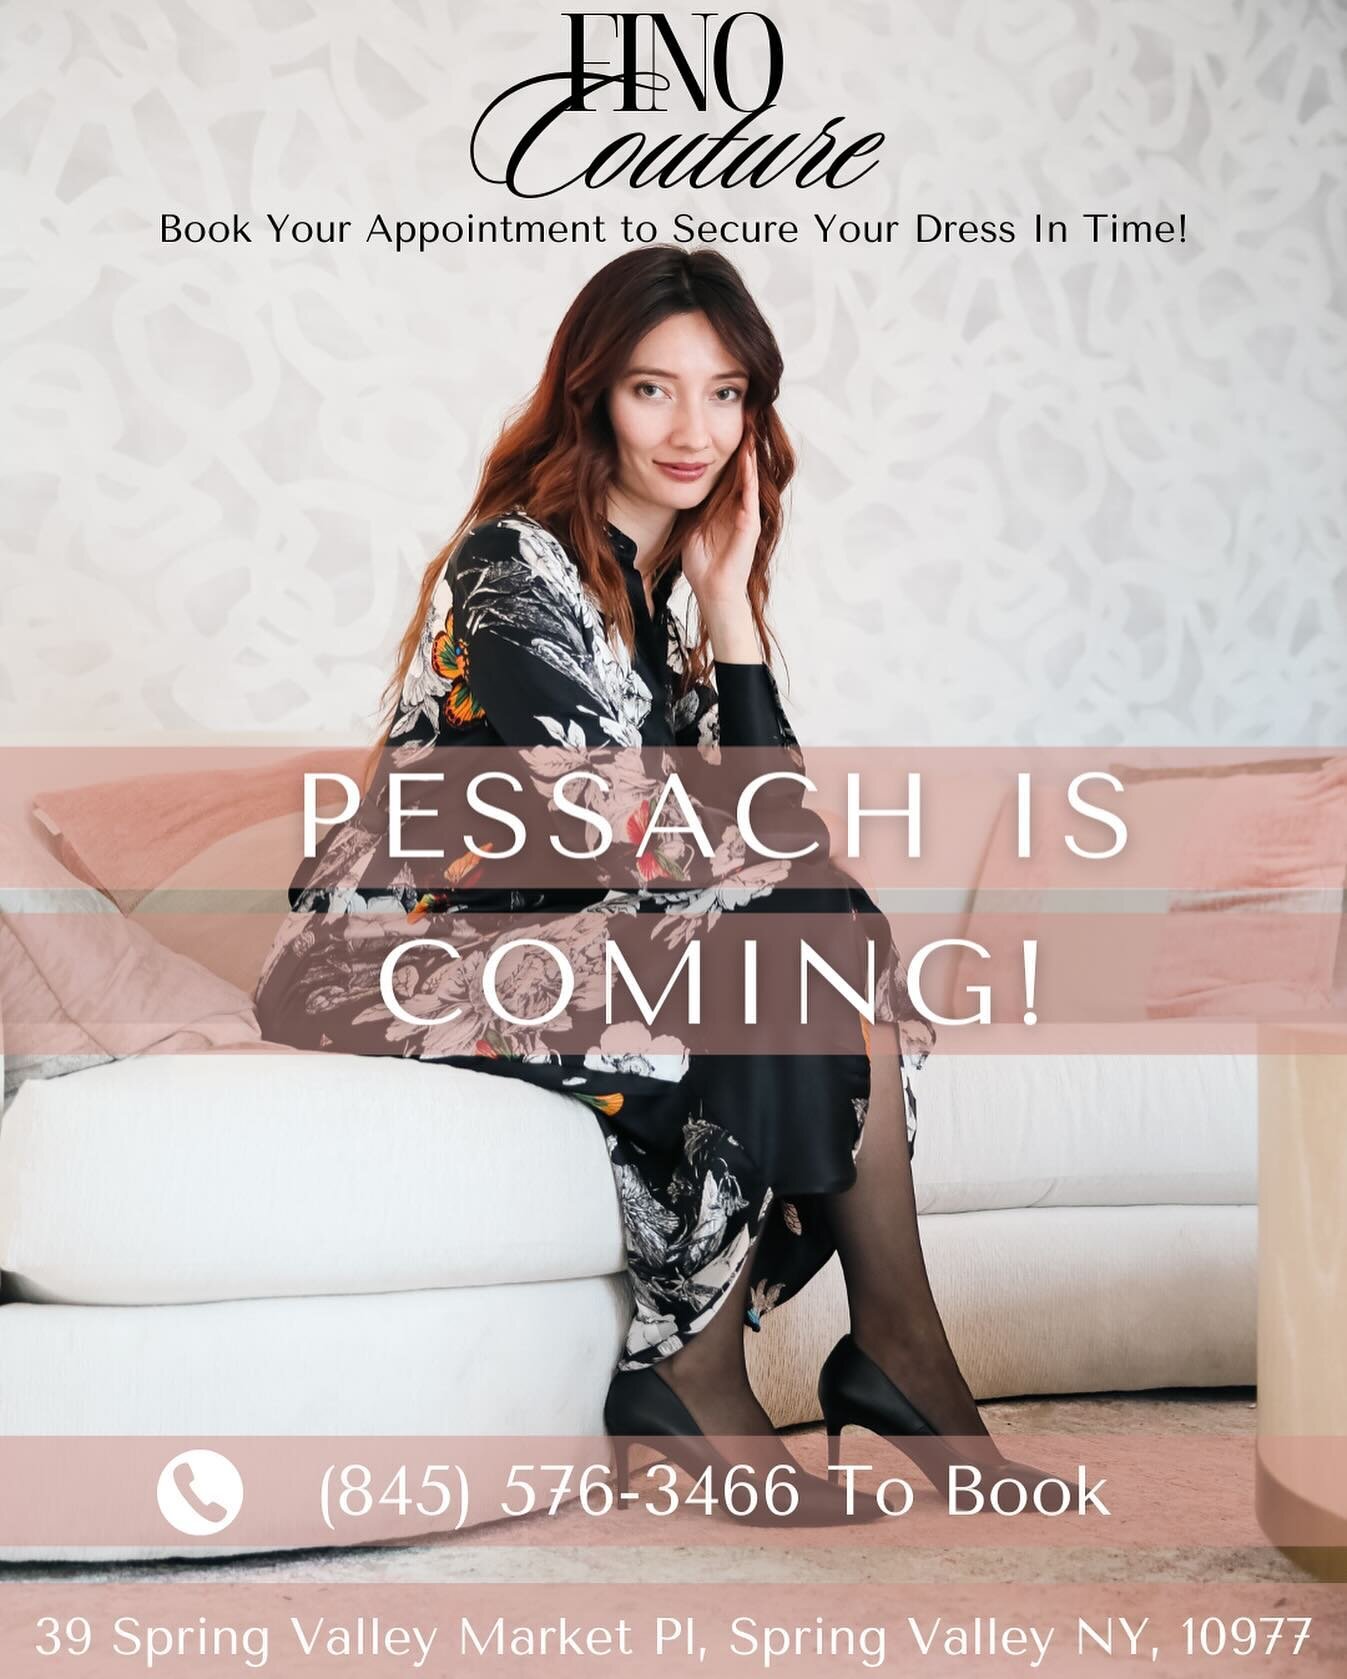 Only one week left to take advantage of our Buy One Get One 50% off Sale on Dresses! Book your appointment today to secure your dress for Pessach!